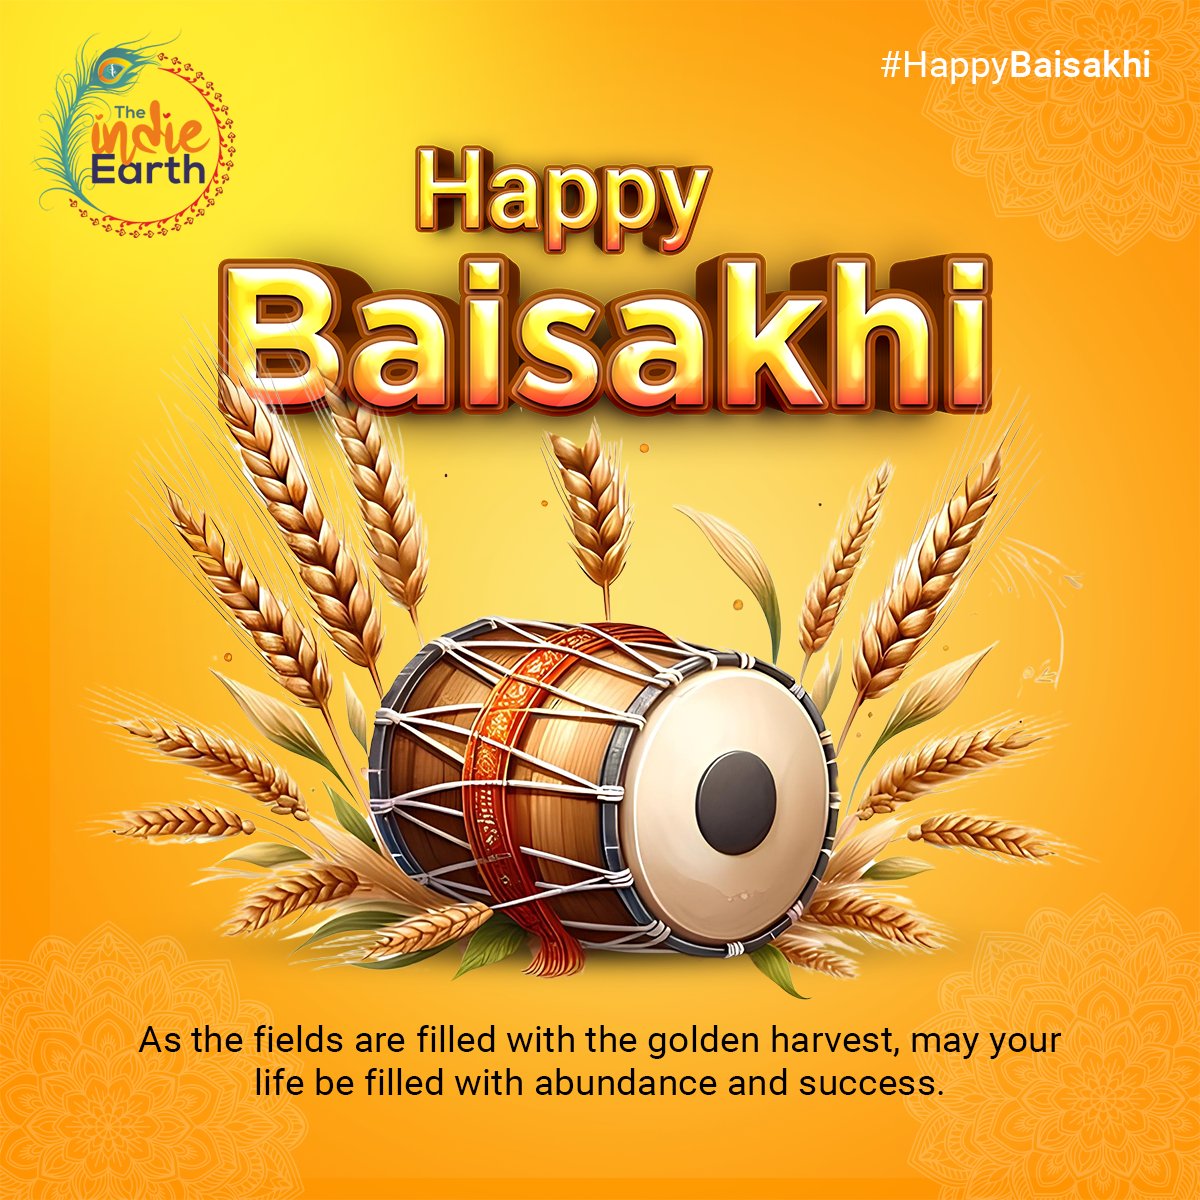 As the fields are filled with the golden harvest, may your life be filled with abundance and success.
🌾Happy Baisakhi!🎉

Visit at: theindieearth.in

#theindieearth #baisakhi #baisa #india #baisaraj #vaisakhi #happybaisakhi #ugadi #punjab #festival #waheguru #happiness